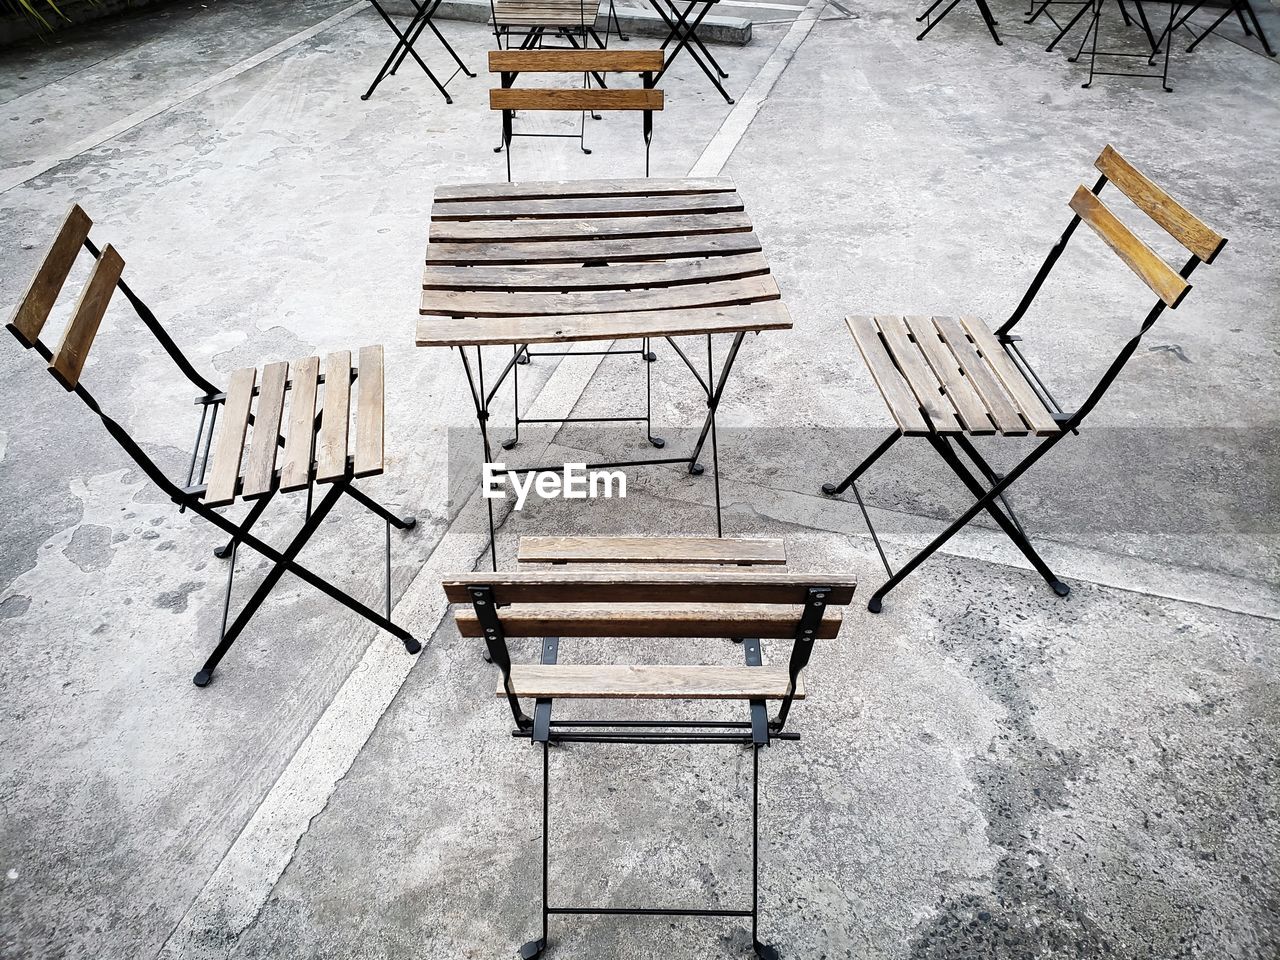 HIGH ANGLE VIEW OF EMPTY CHAIRS AND TABLES